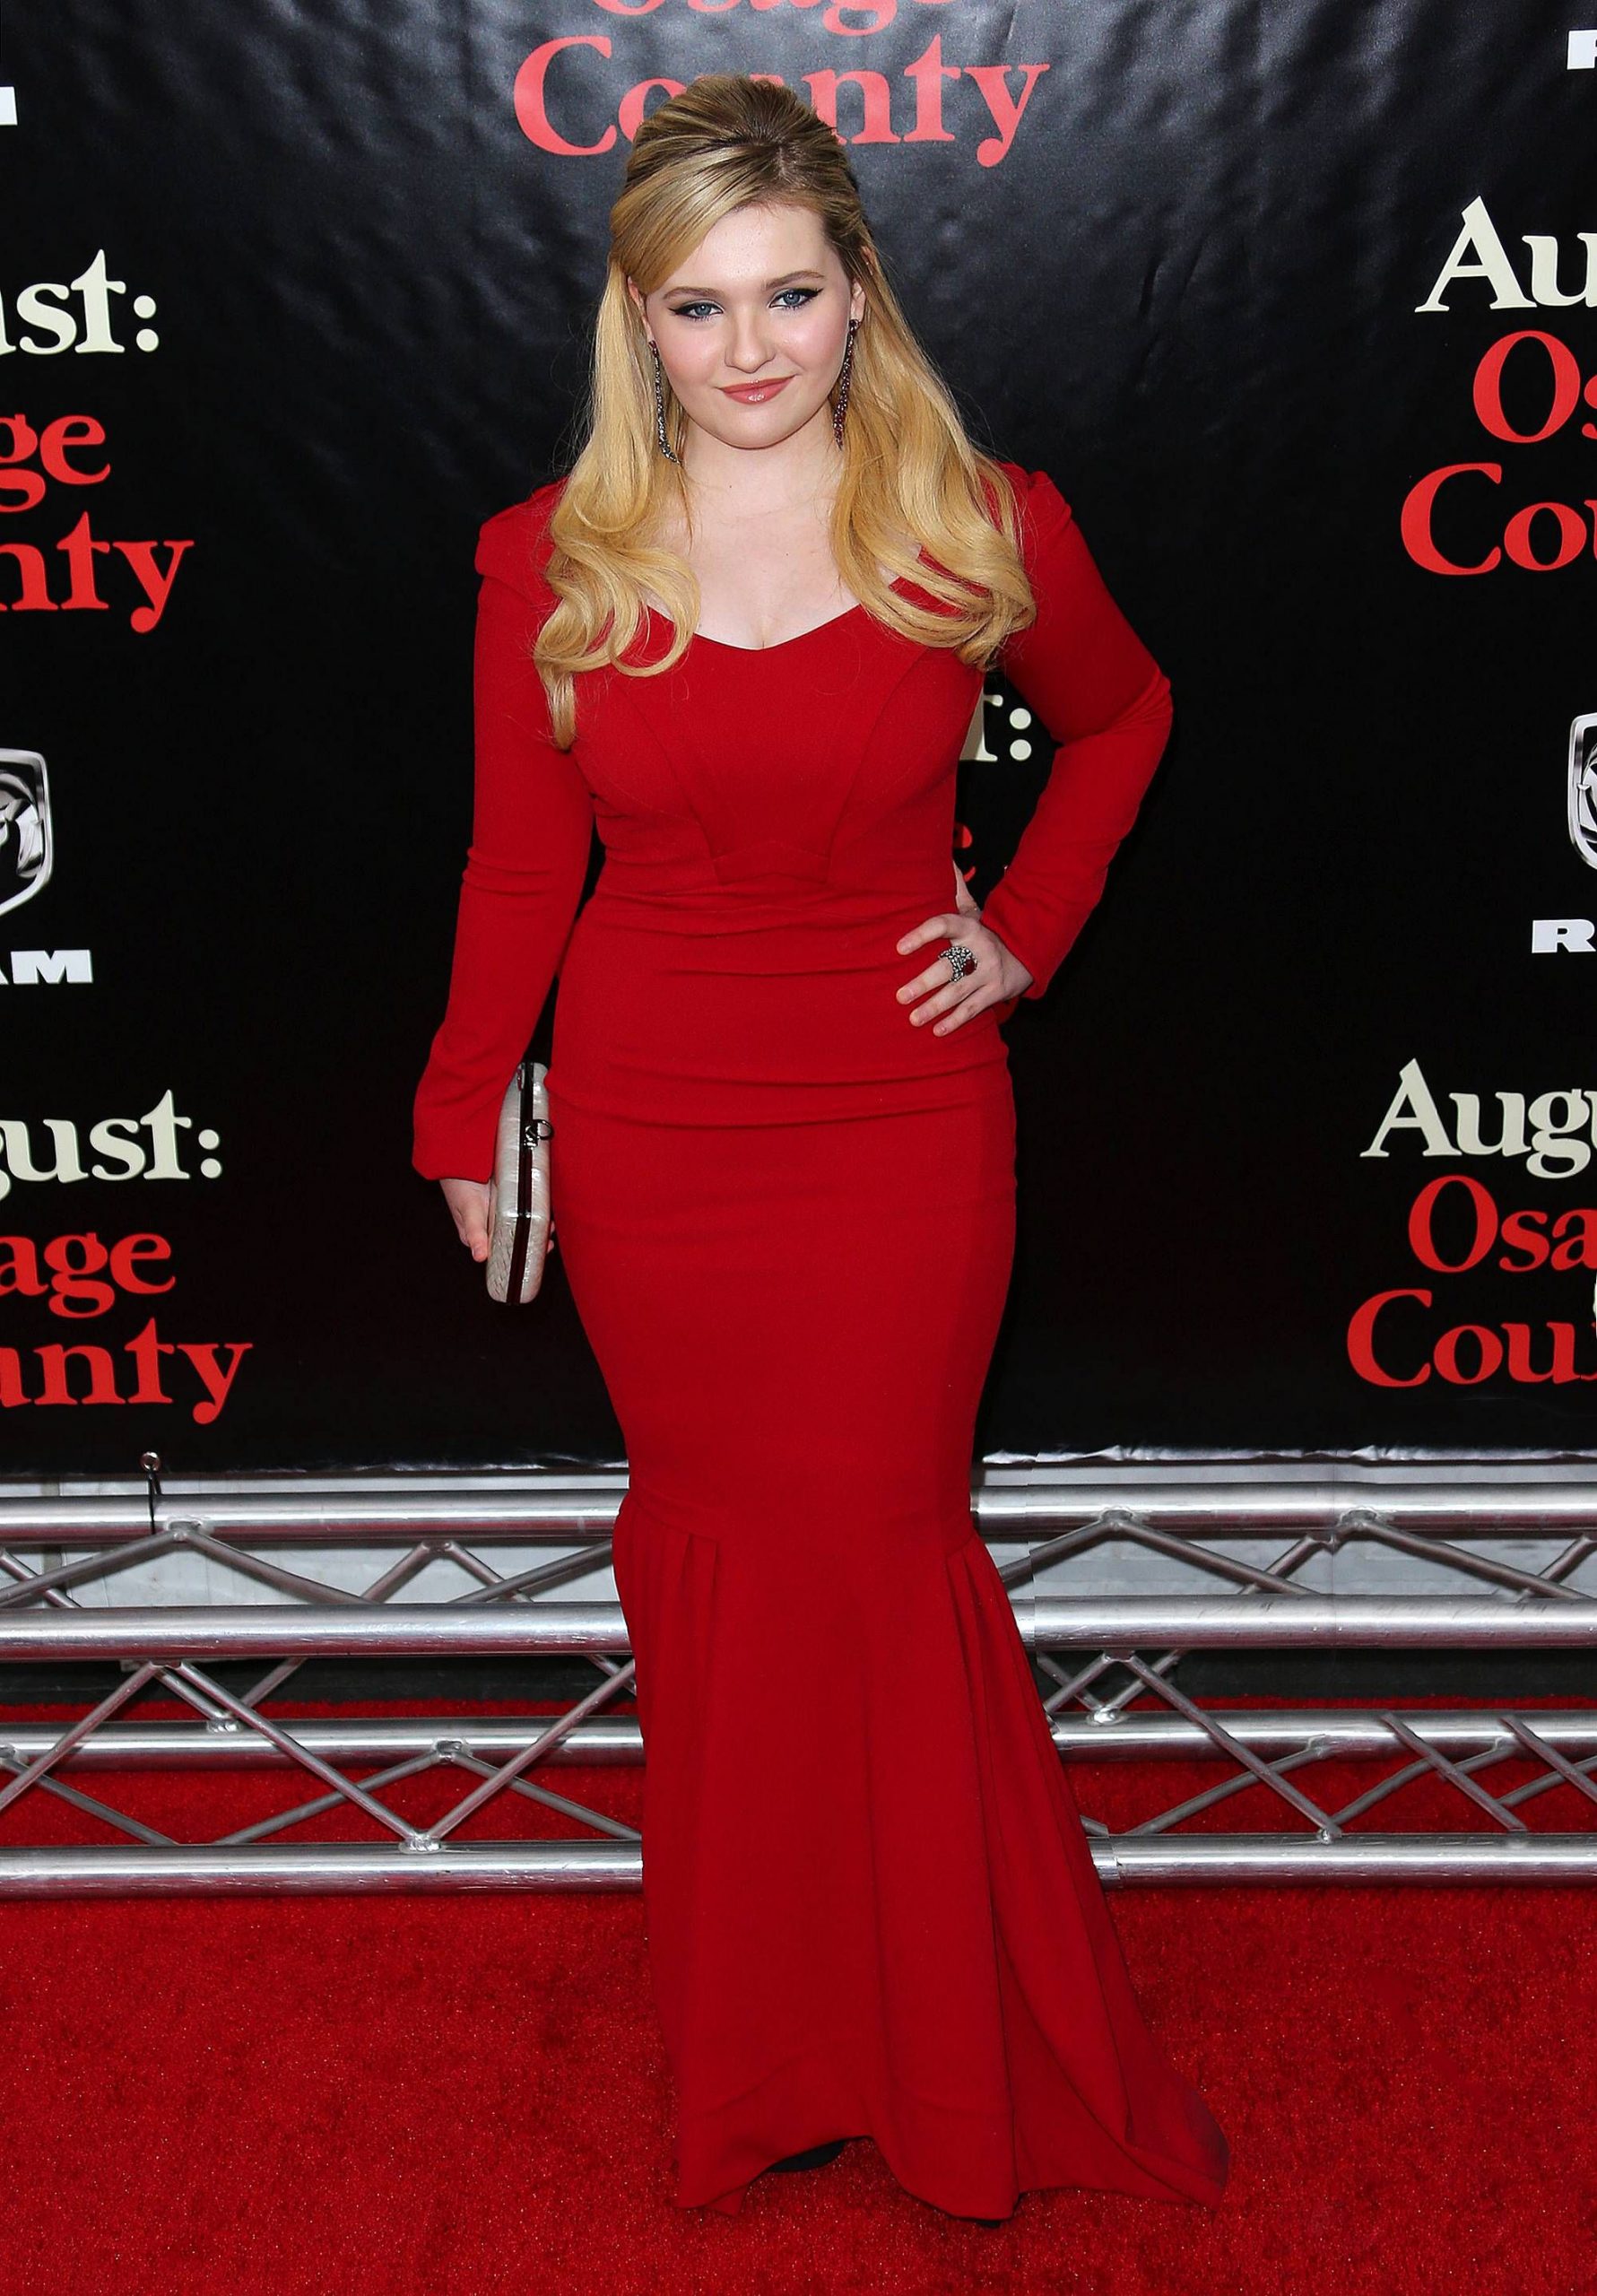 The Fancy And Red Hot Fish Look Of Abigail Breslin